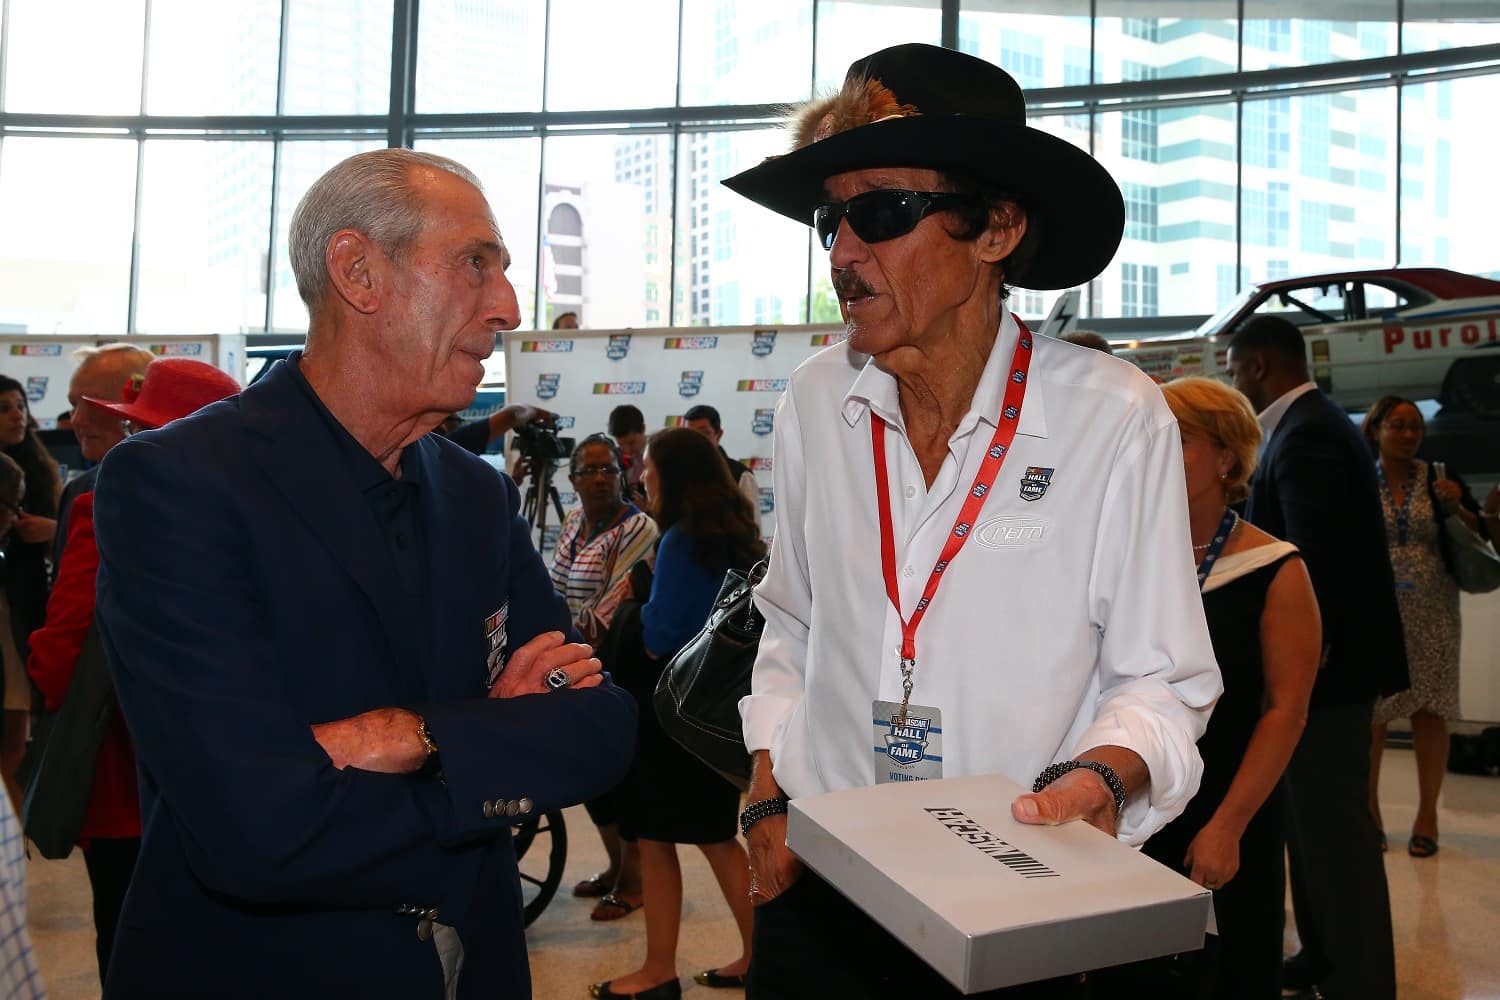 Ned Jarrett and Richard Petty speak after the NASCAR Hall of Fame Voting at NASCAR Hall of Fame on May 22, 2013, in Charlotte, North Carolina.  Streeter Lecka/NASCAR via Getty Images